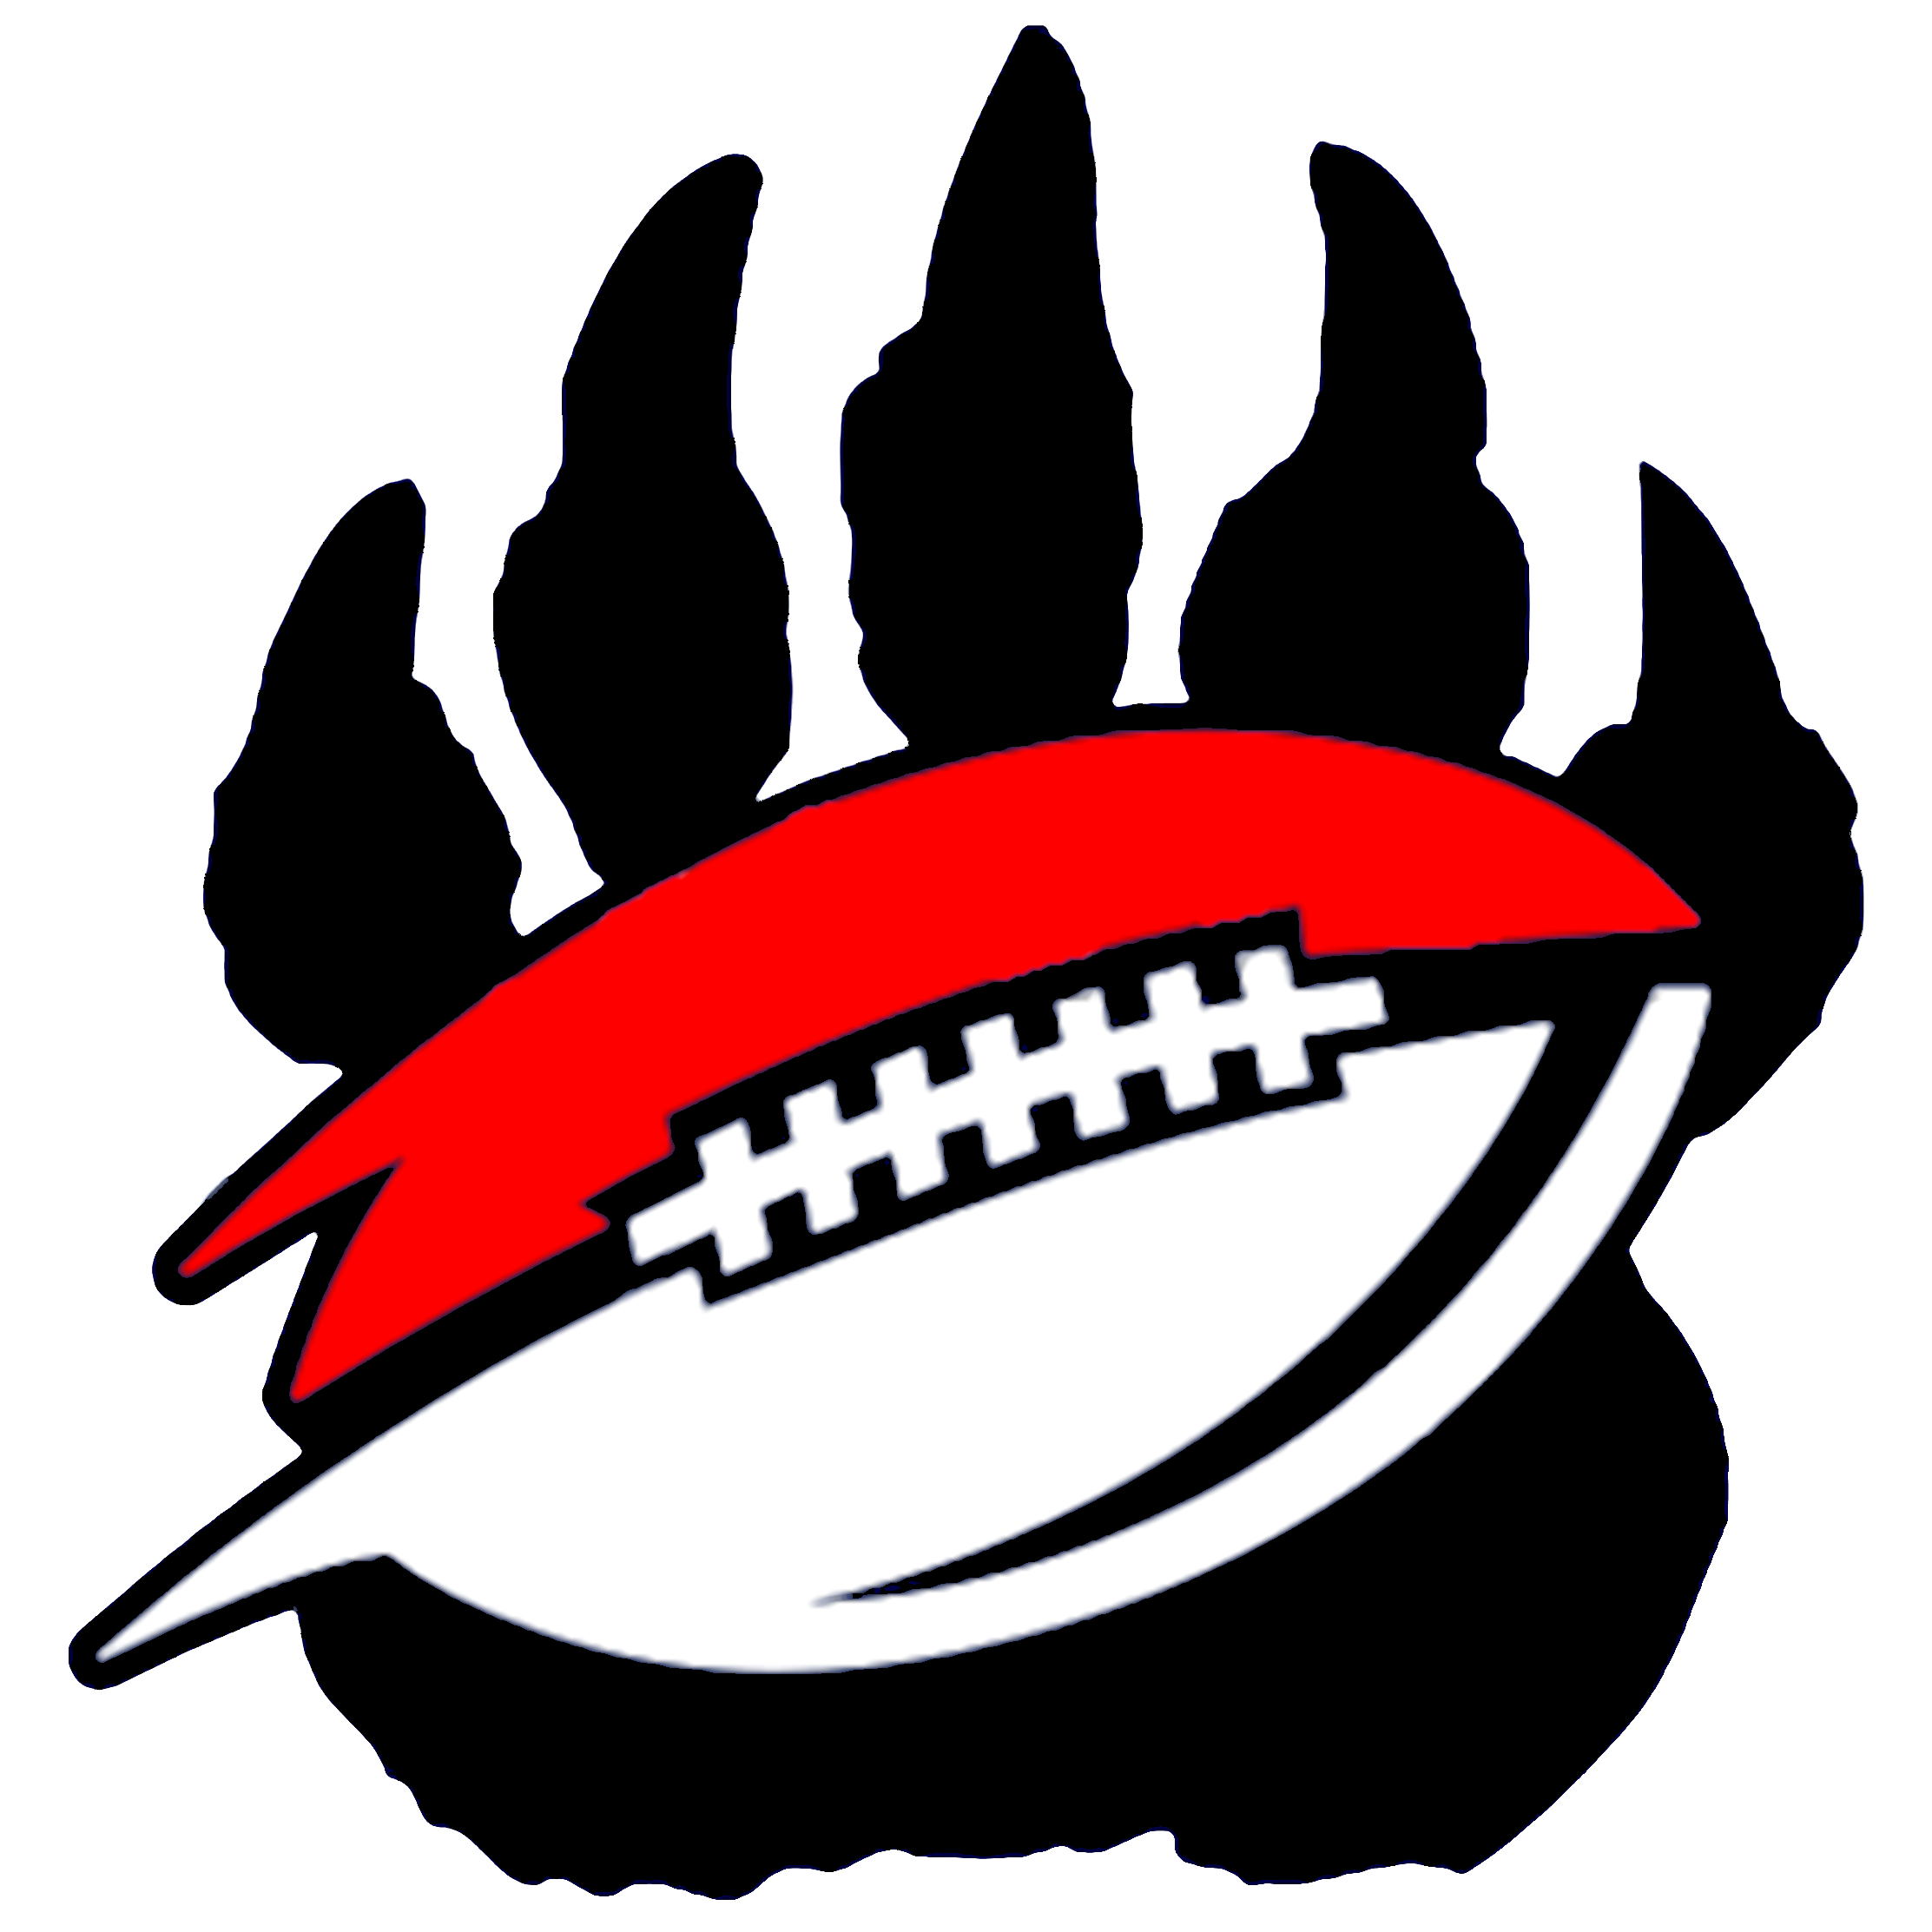 clipart picture of a football - photo #43